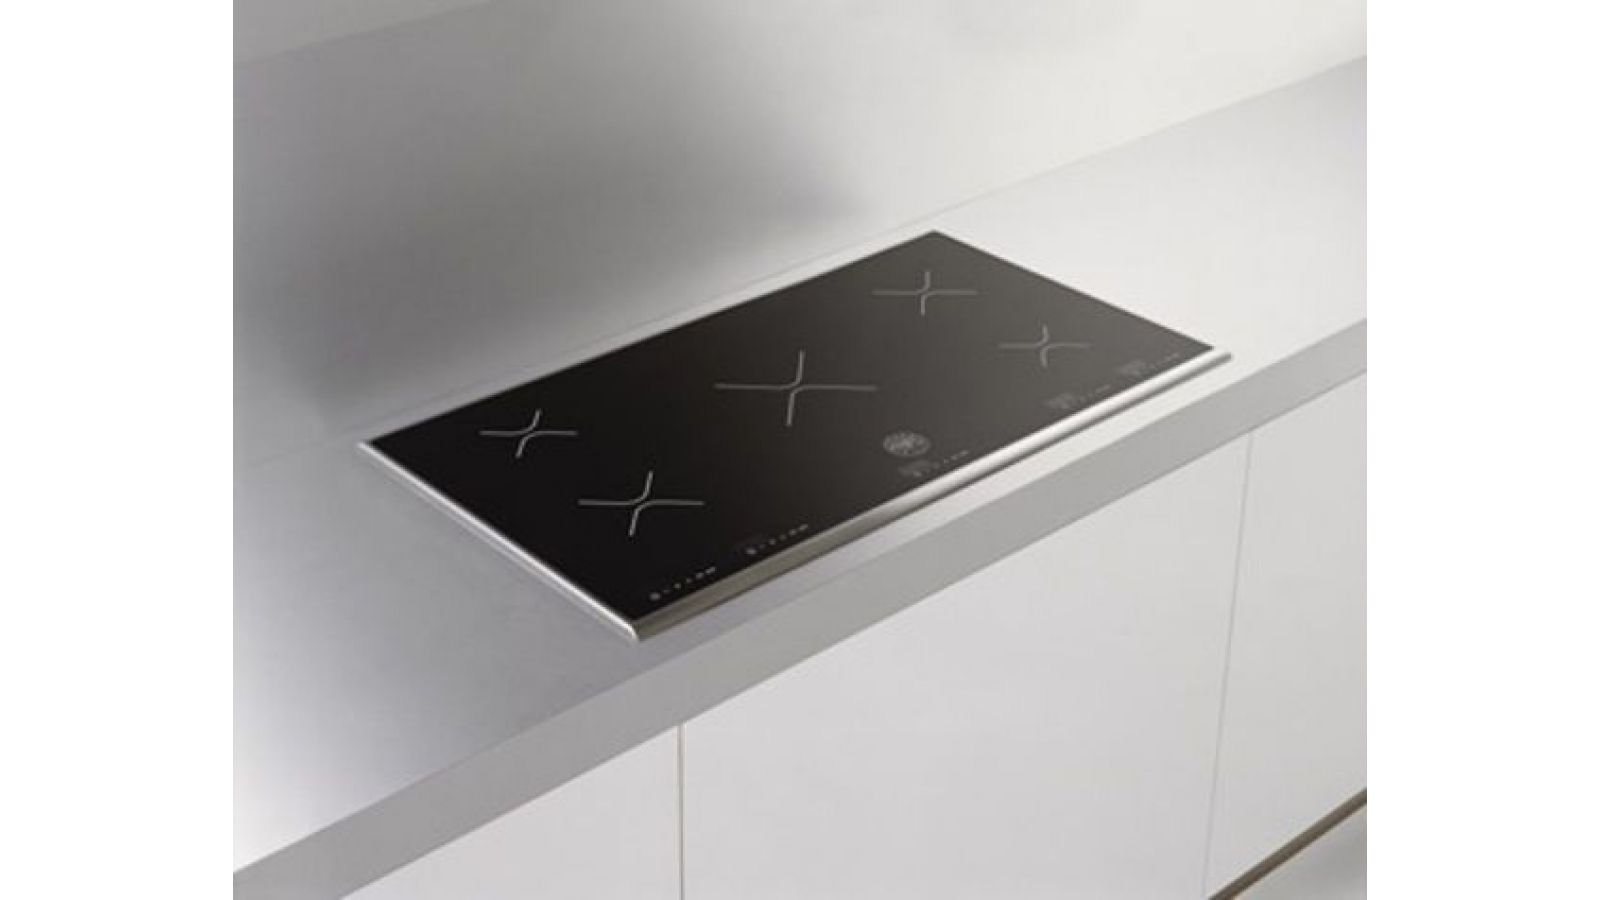 Design Series Induction Touch Control 36 in Cooktop